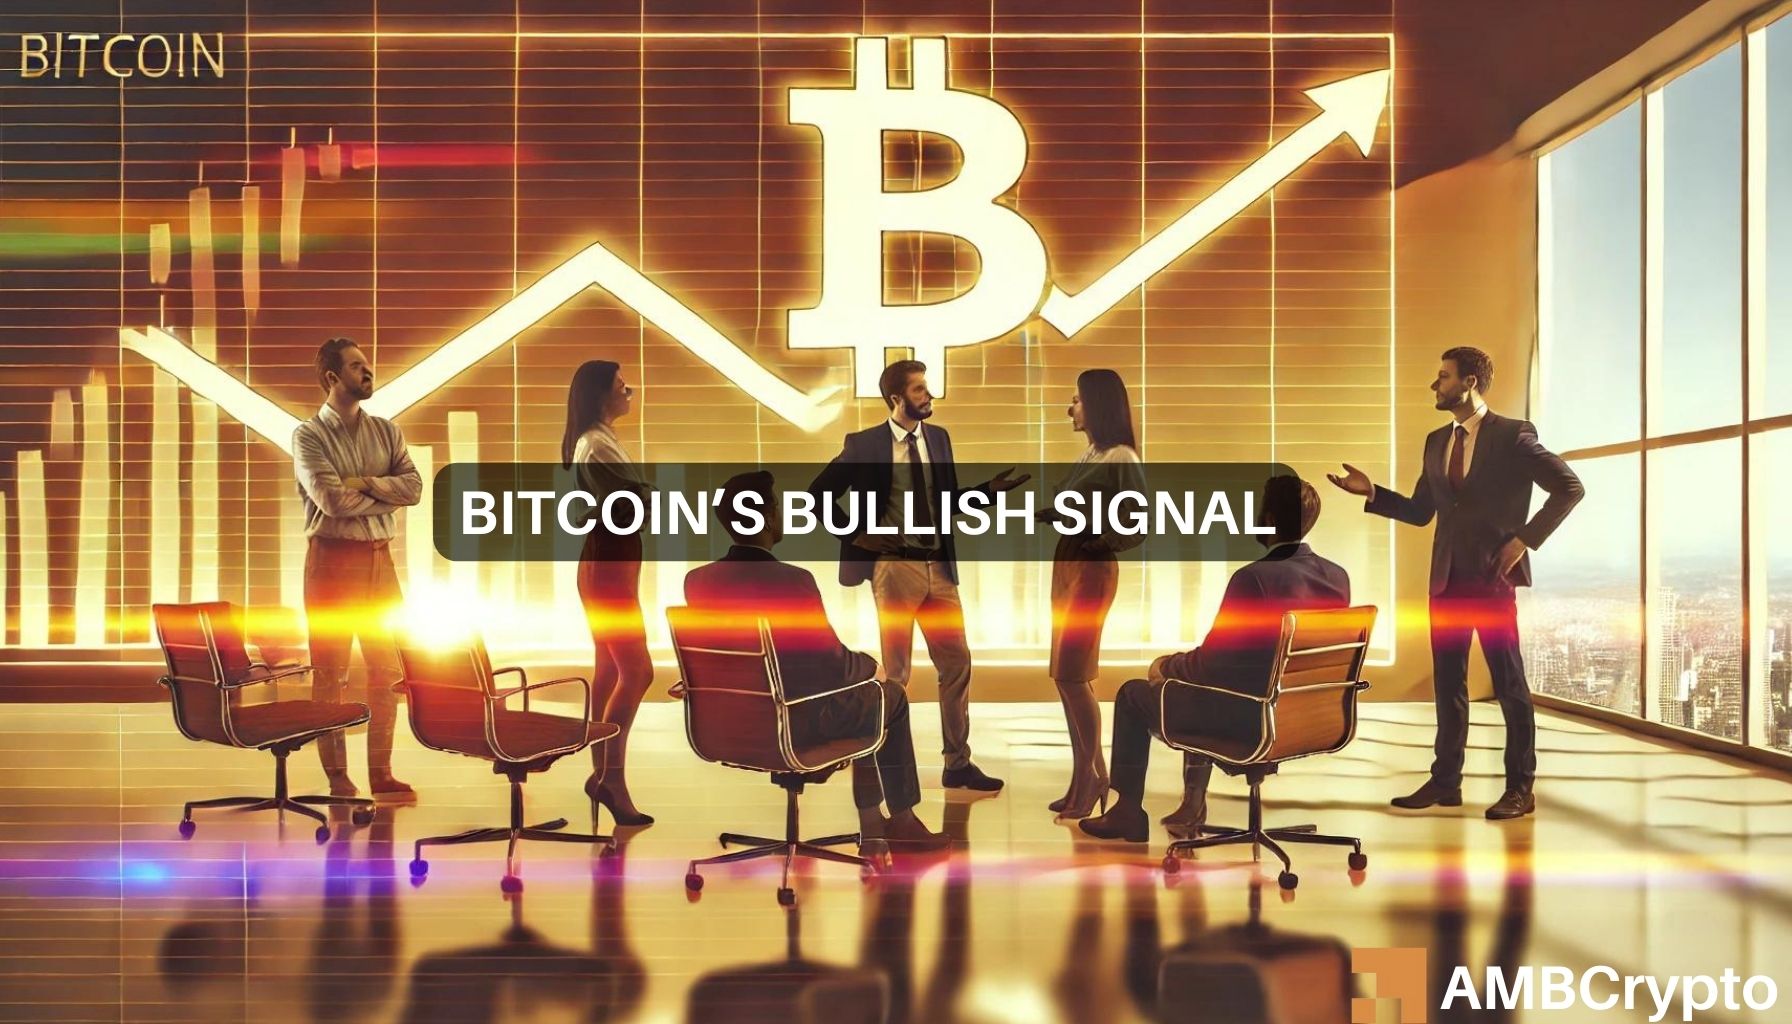 Bitcoin: Michael Saylor has THIS to say about BTC’s volatility